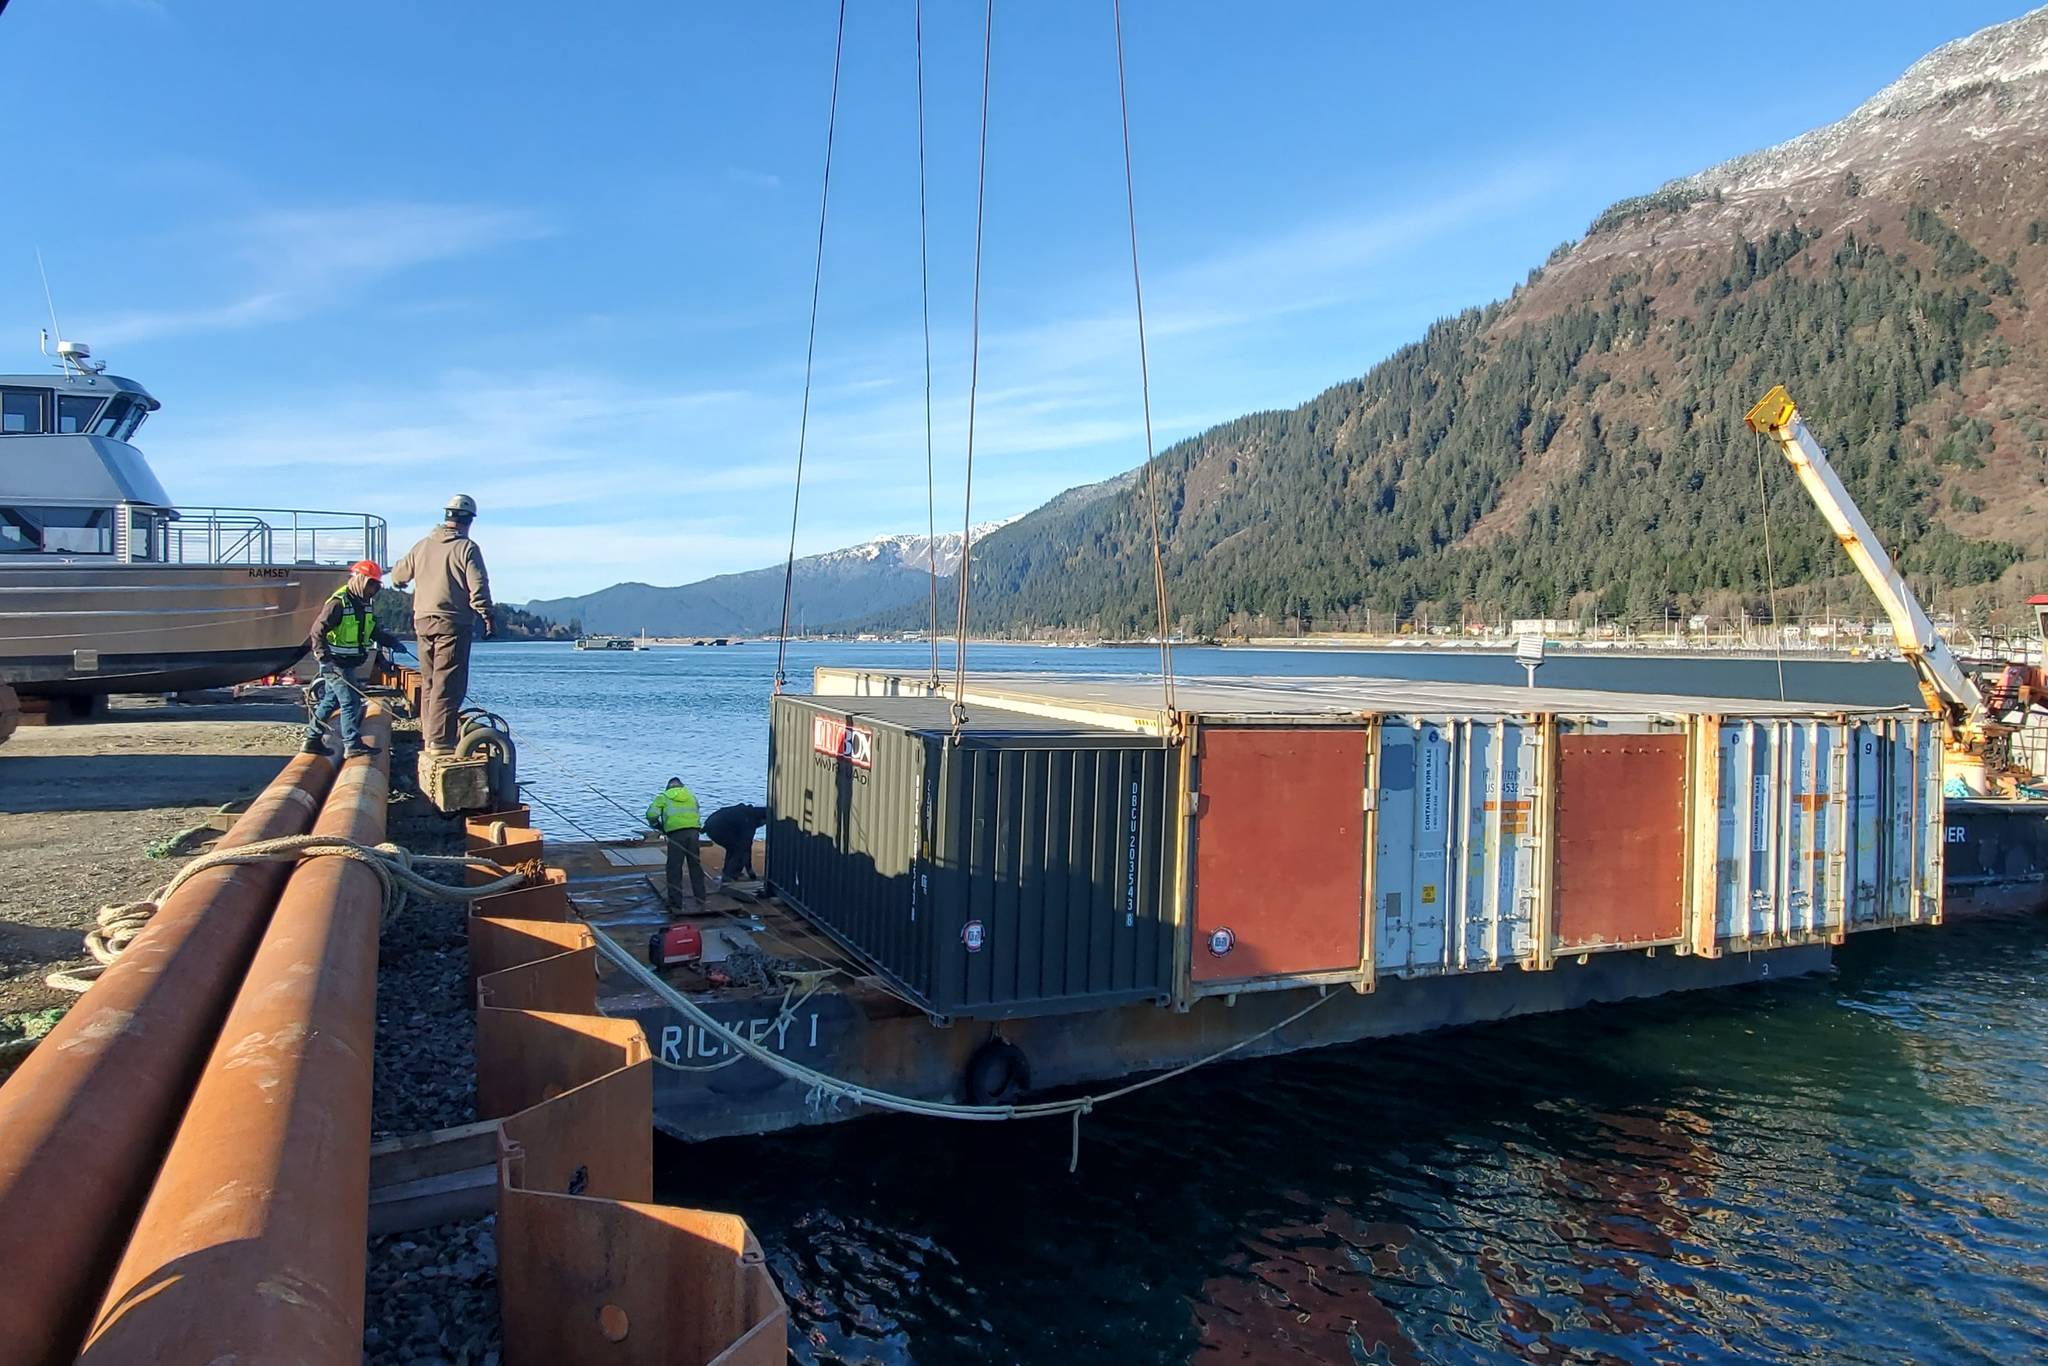 Courtesy photo / Central Council of the Tlingit and Haida Indian Tribes of Alaska
The Biden administration says it wants to strengthen ties with tribal governments like Central Council of Tlingit & Haida Indian Tribes of Alaska, whose workers are seen here loading shipping containers full of supplies bound for needy communities in Southeast Alaska onto a barge in the Gastineau Channel on Oct. 21, 2020.